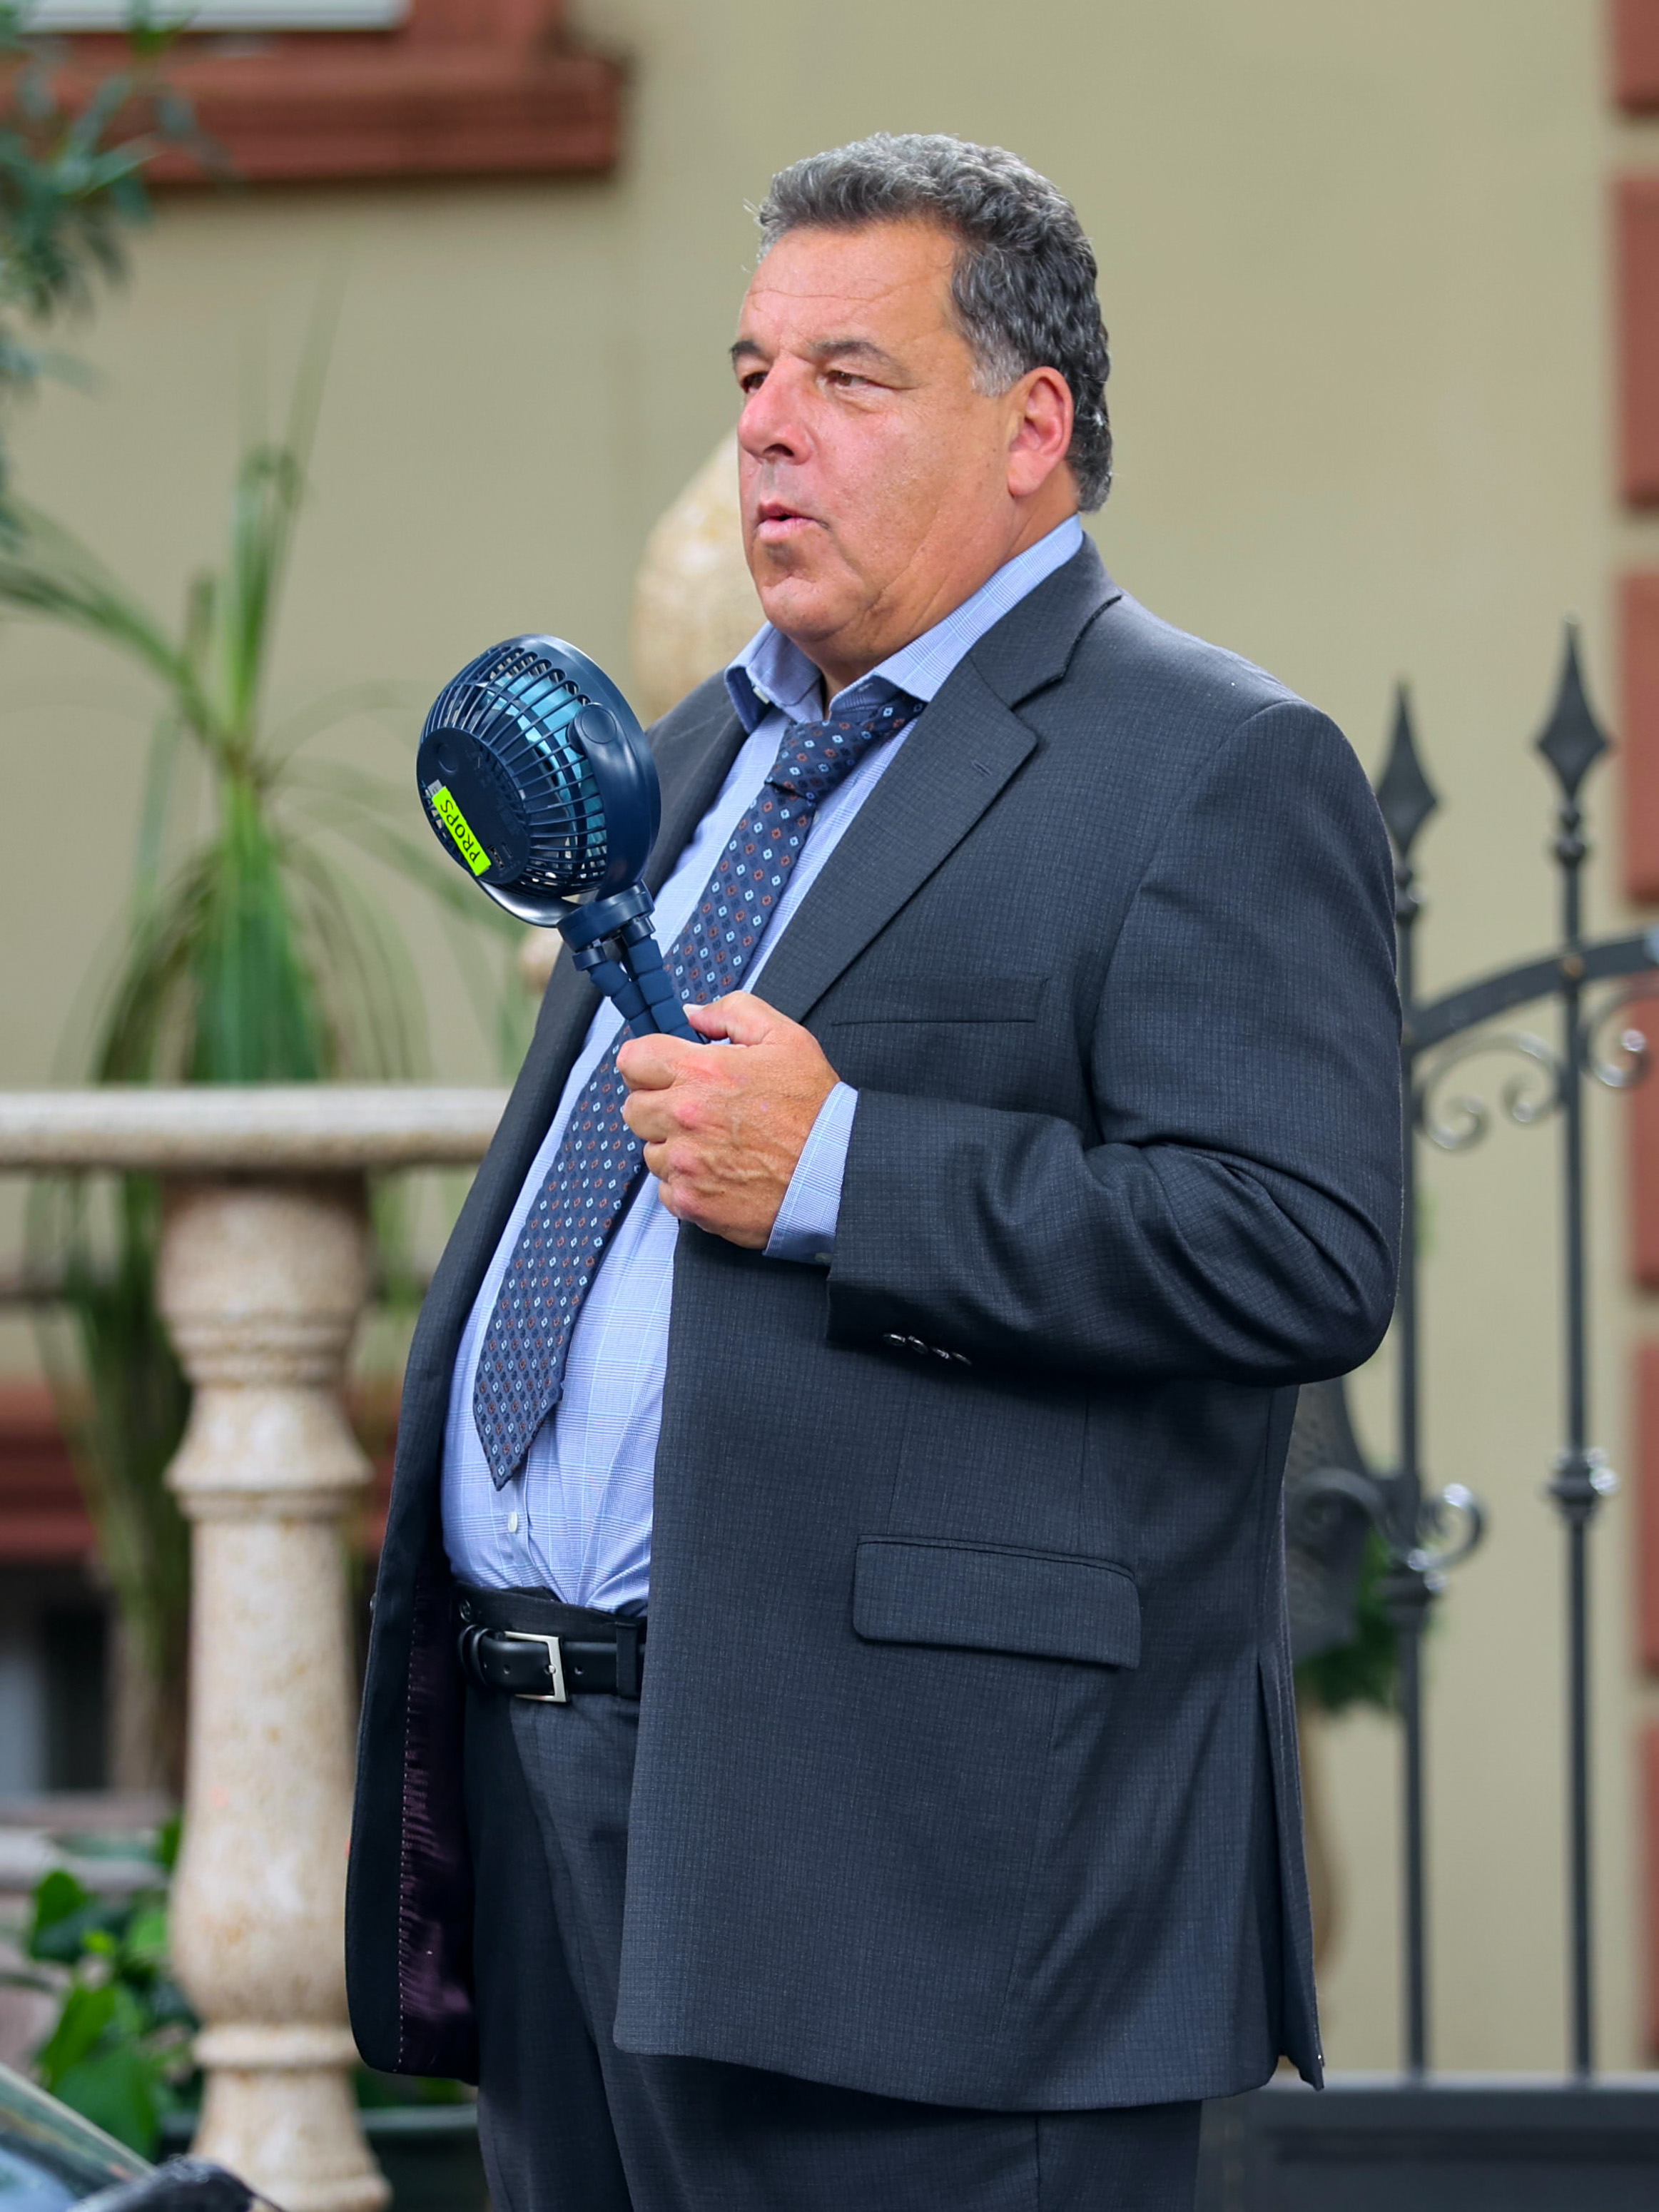 Steve Schirripa during the filming of an episode of "Blue Bloods" in New York City on September 13, 2022 | Source: Getty Images